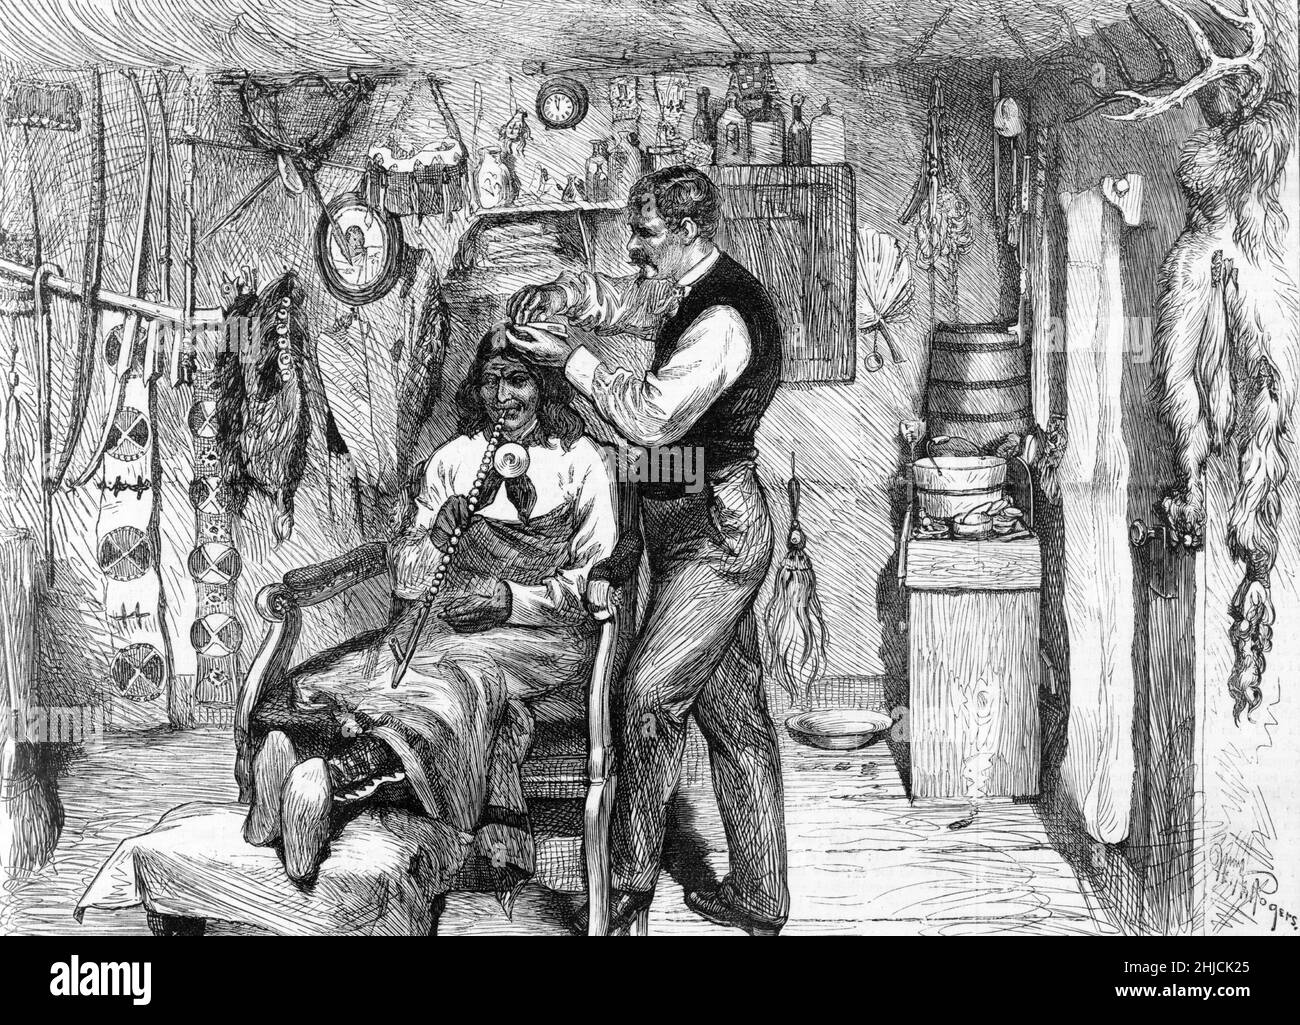 A Native American chief having his hair dressed in a barber's shop at Standing Rock, Dakota Territory. Illustration by William A. Rogers from Harper's Weekly, March 15, 1879. Stock Photo